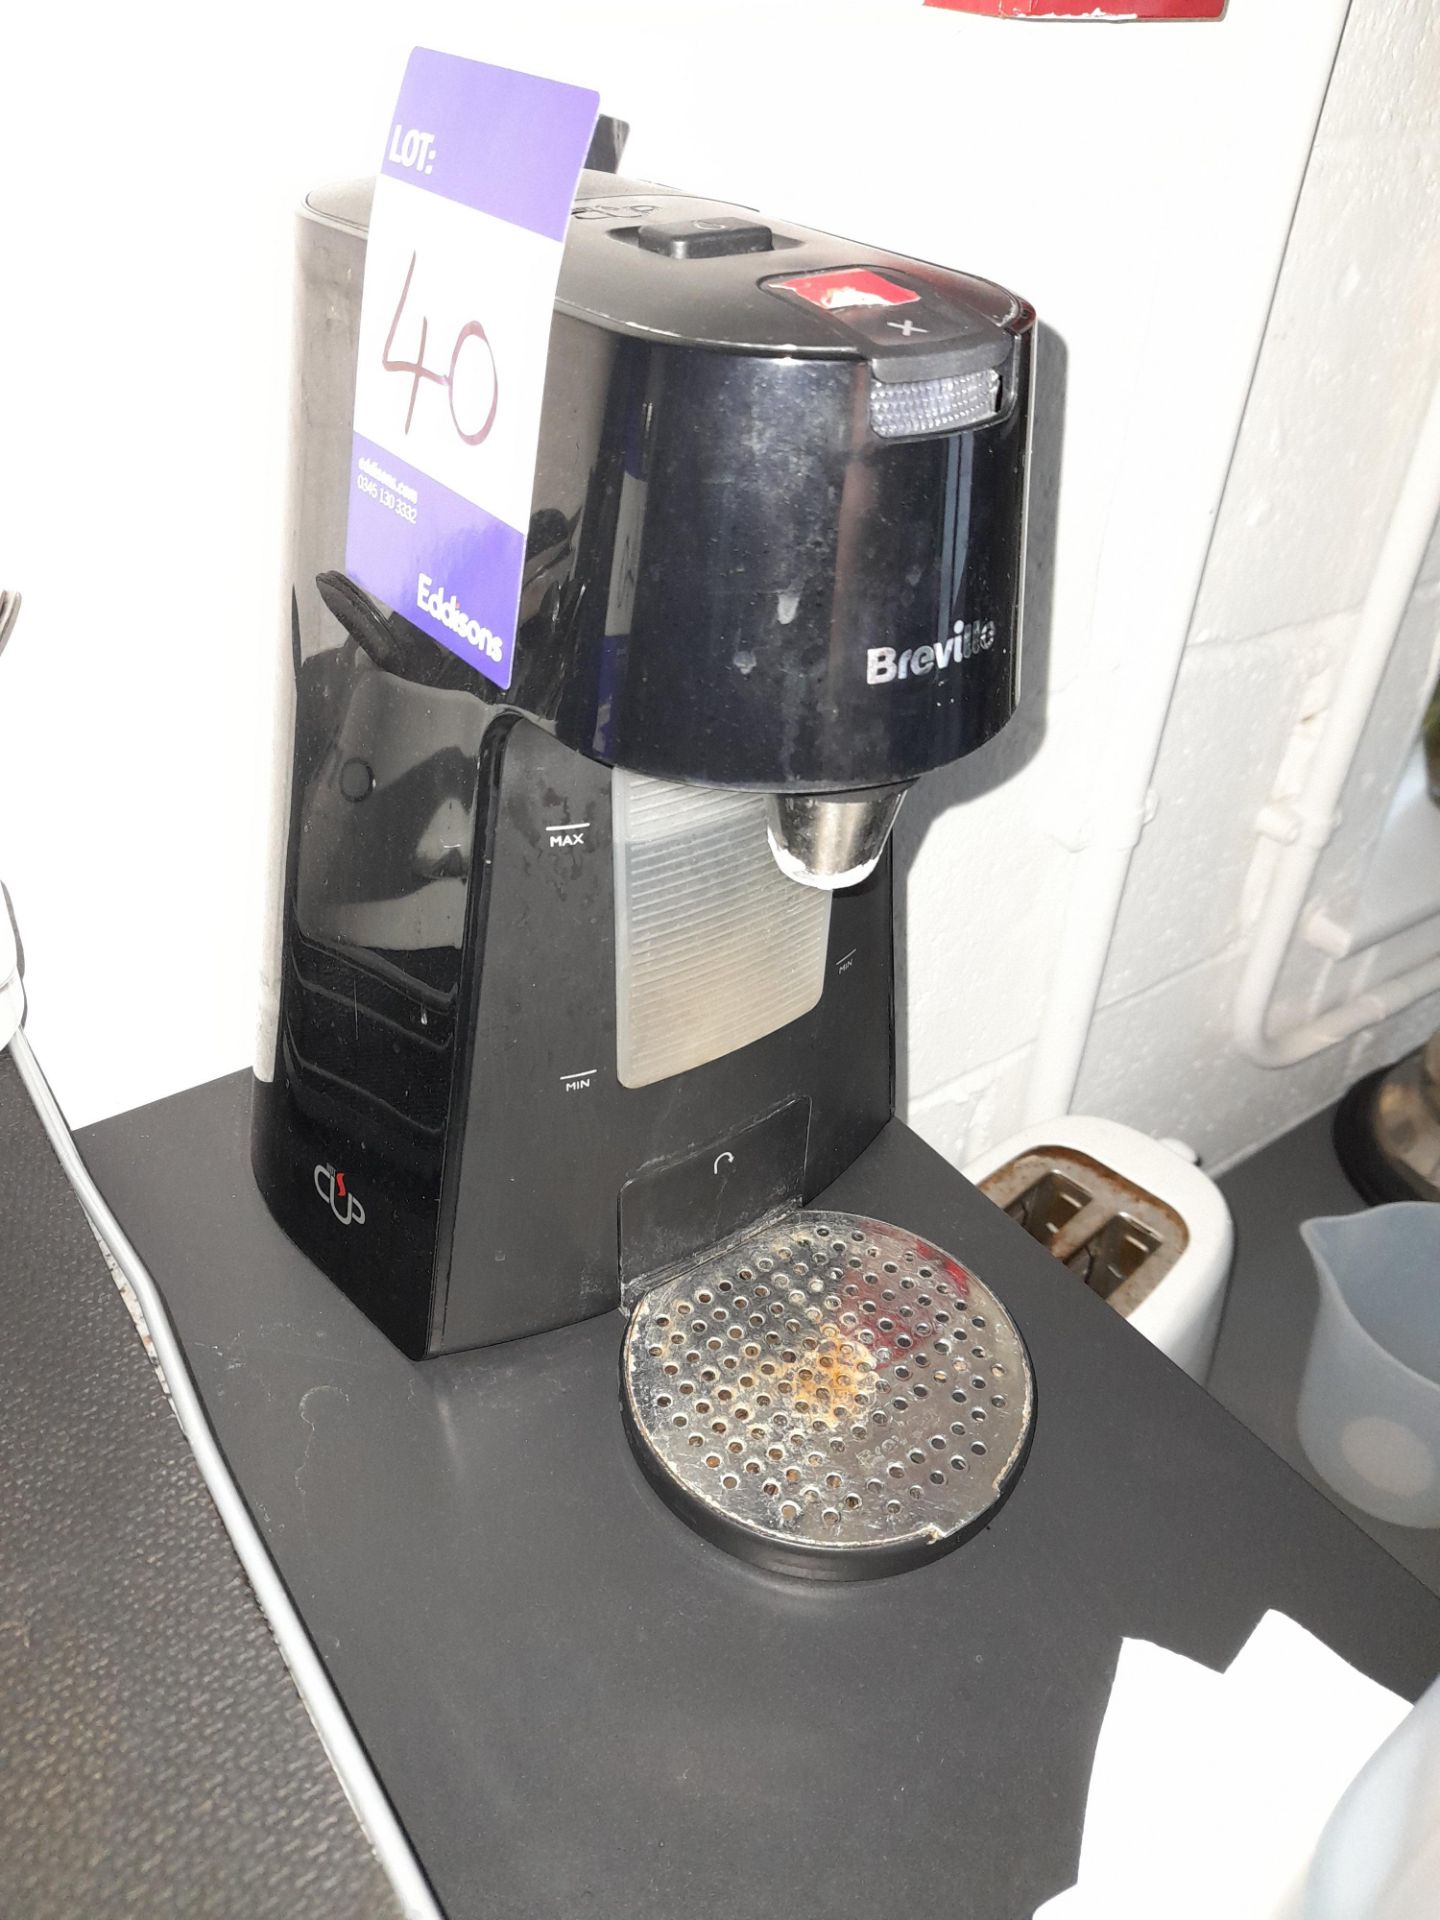 DeLonghi Nescafe Dolce Gusto coffee machine, and Breville hot water machine - Image 3 of 3